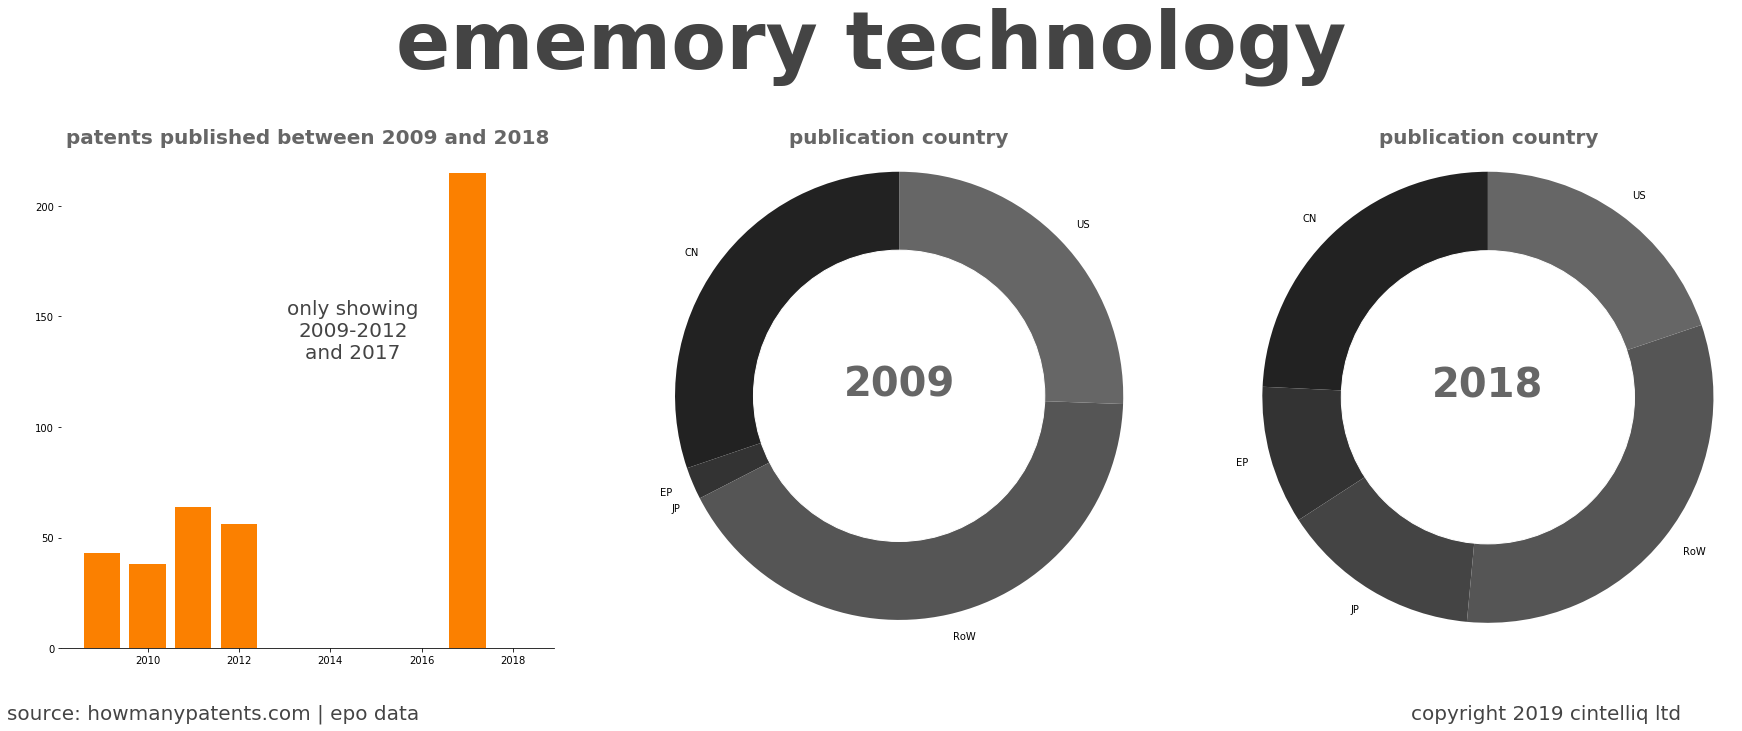 summary of patents for Ememory Technology